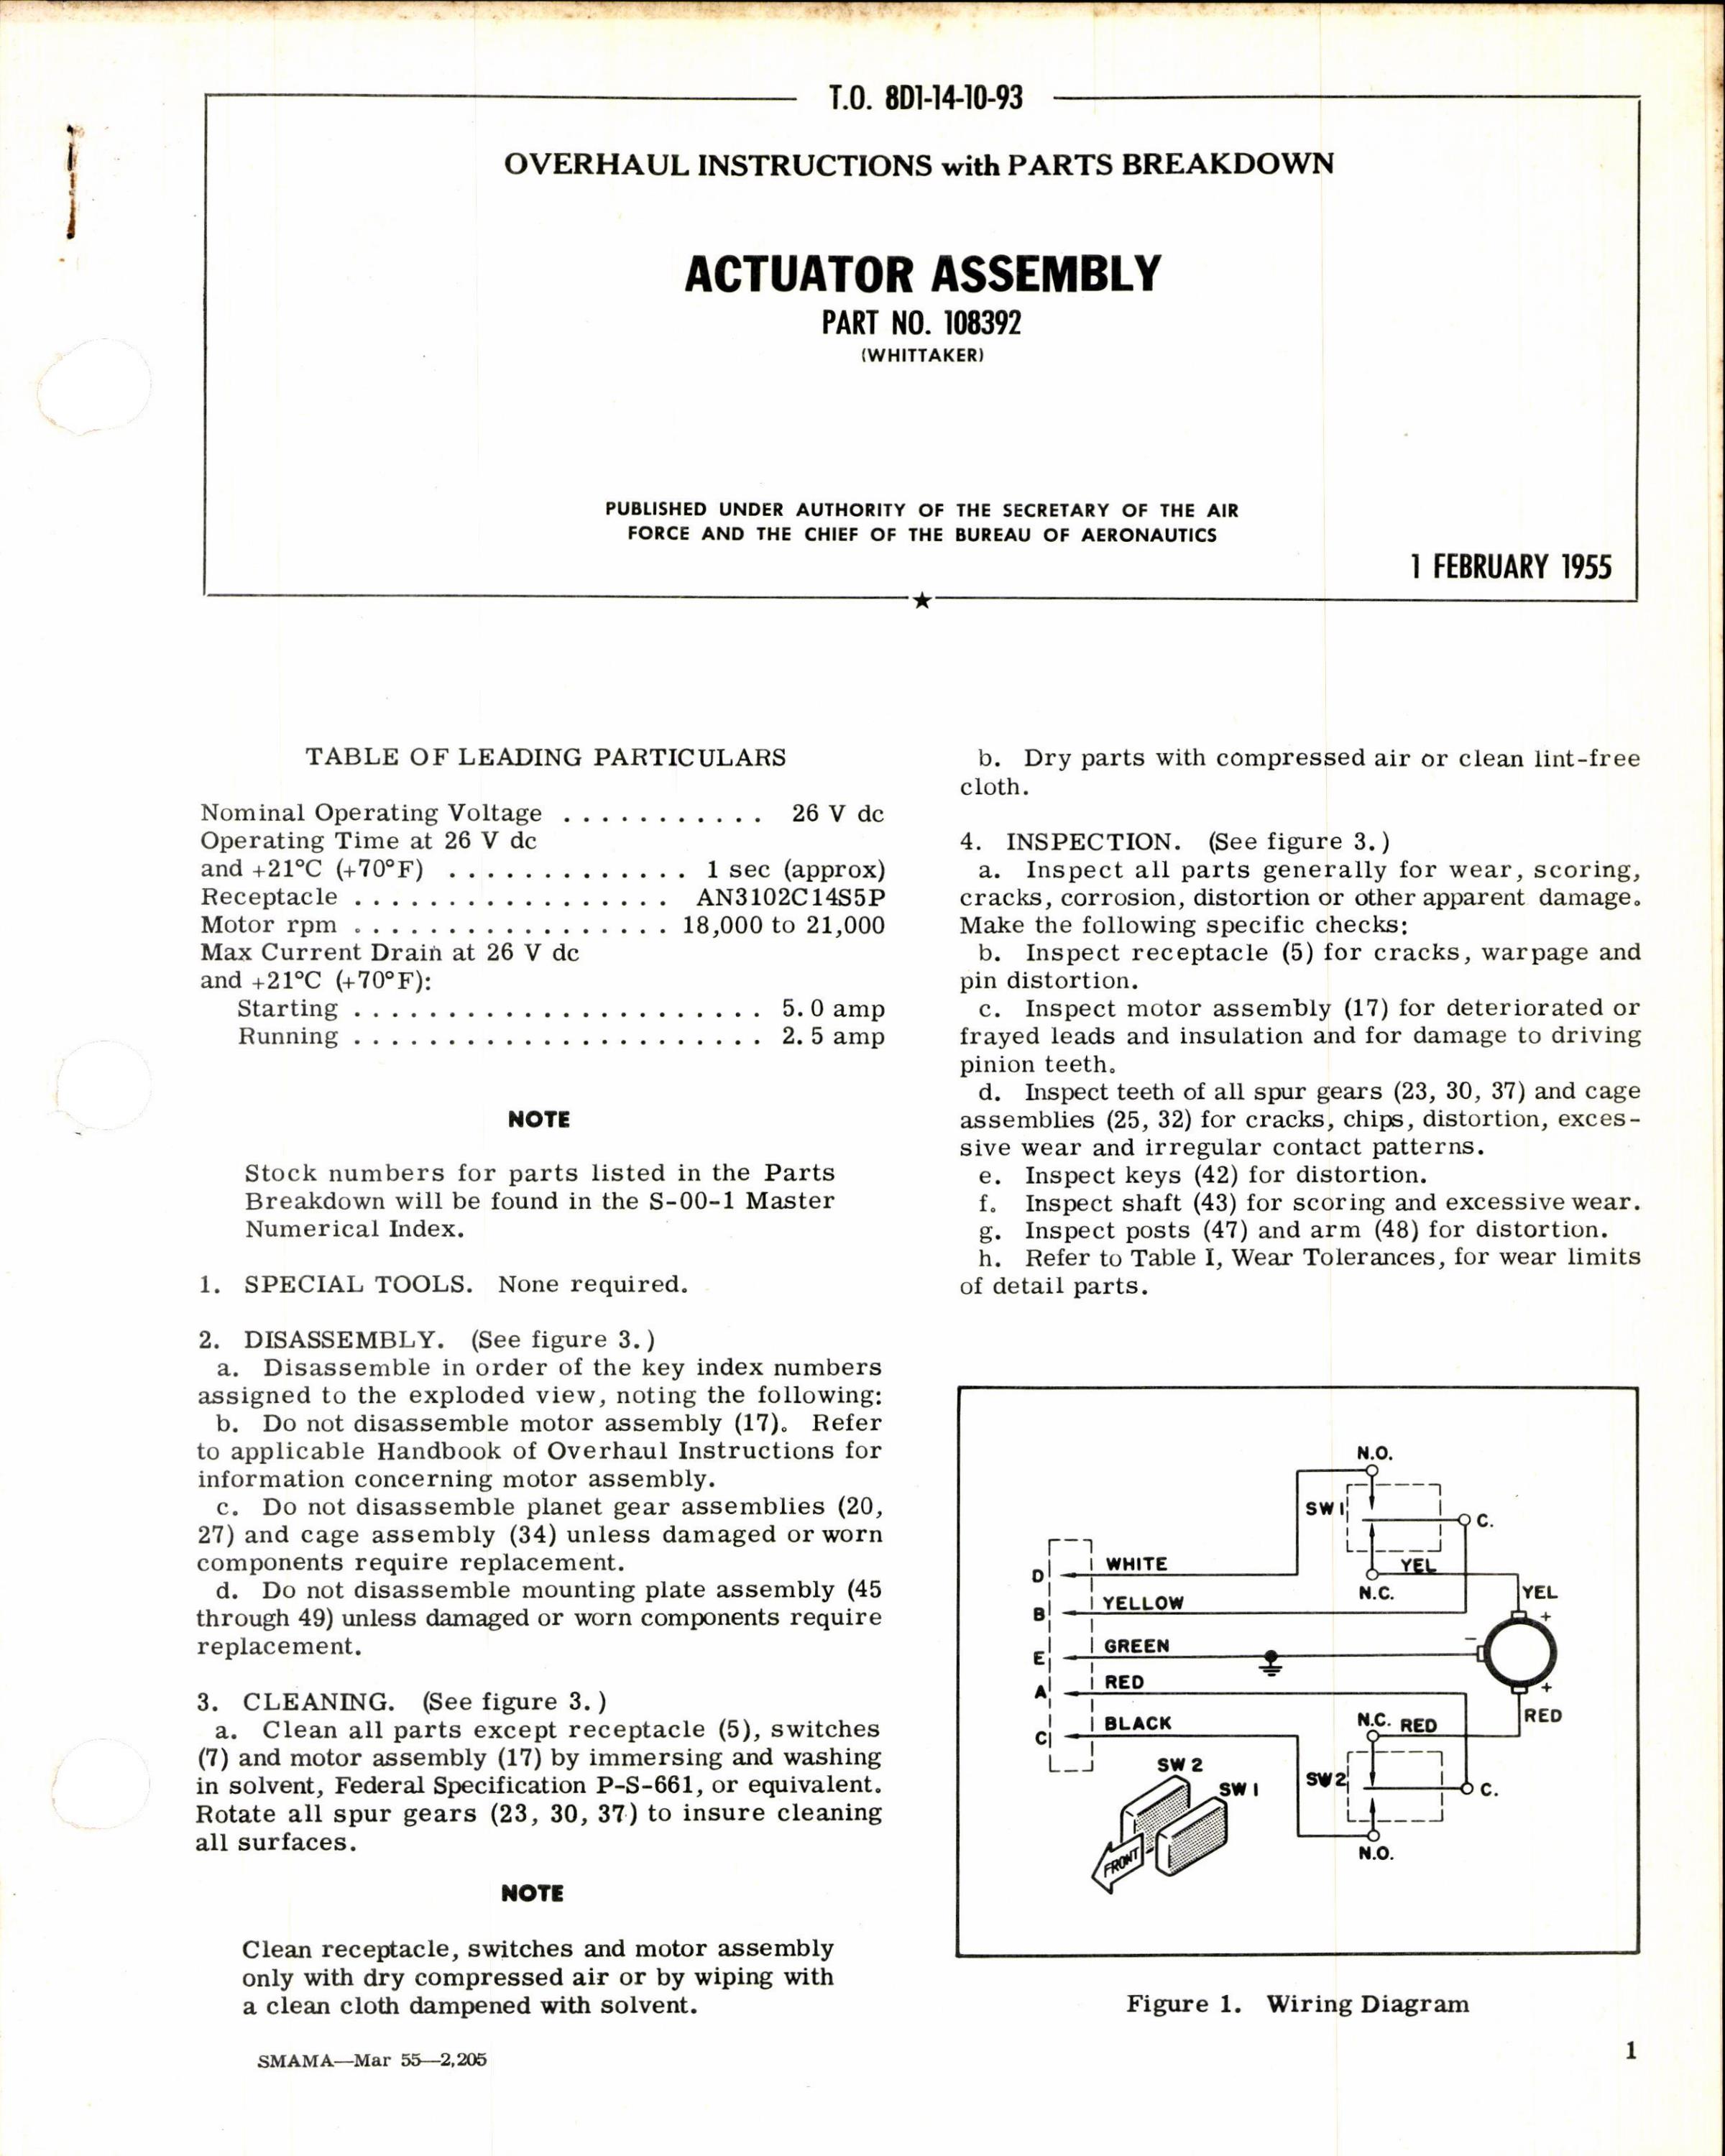 Sample page 1 from AirCorps Library document: Instructions w Parts Breakdown for Actuator Assembly Part 108392